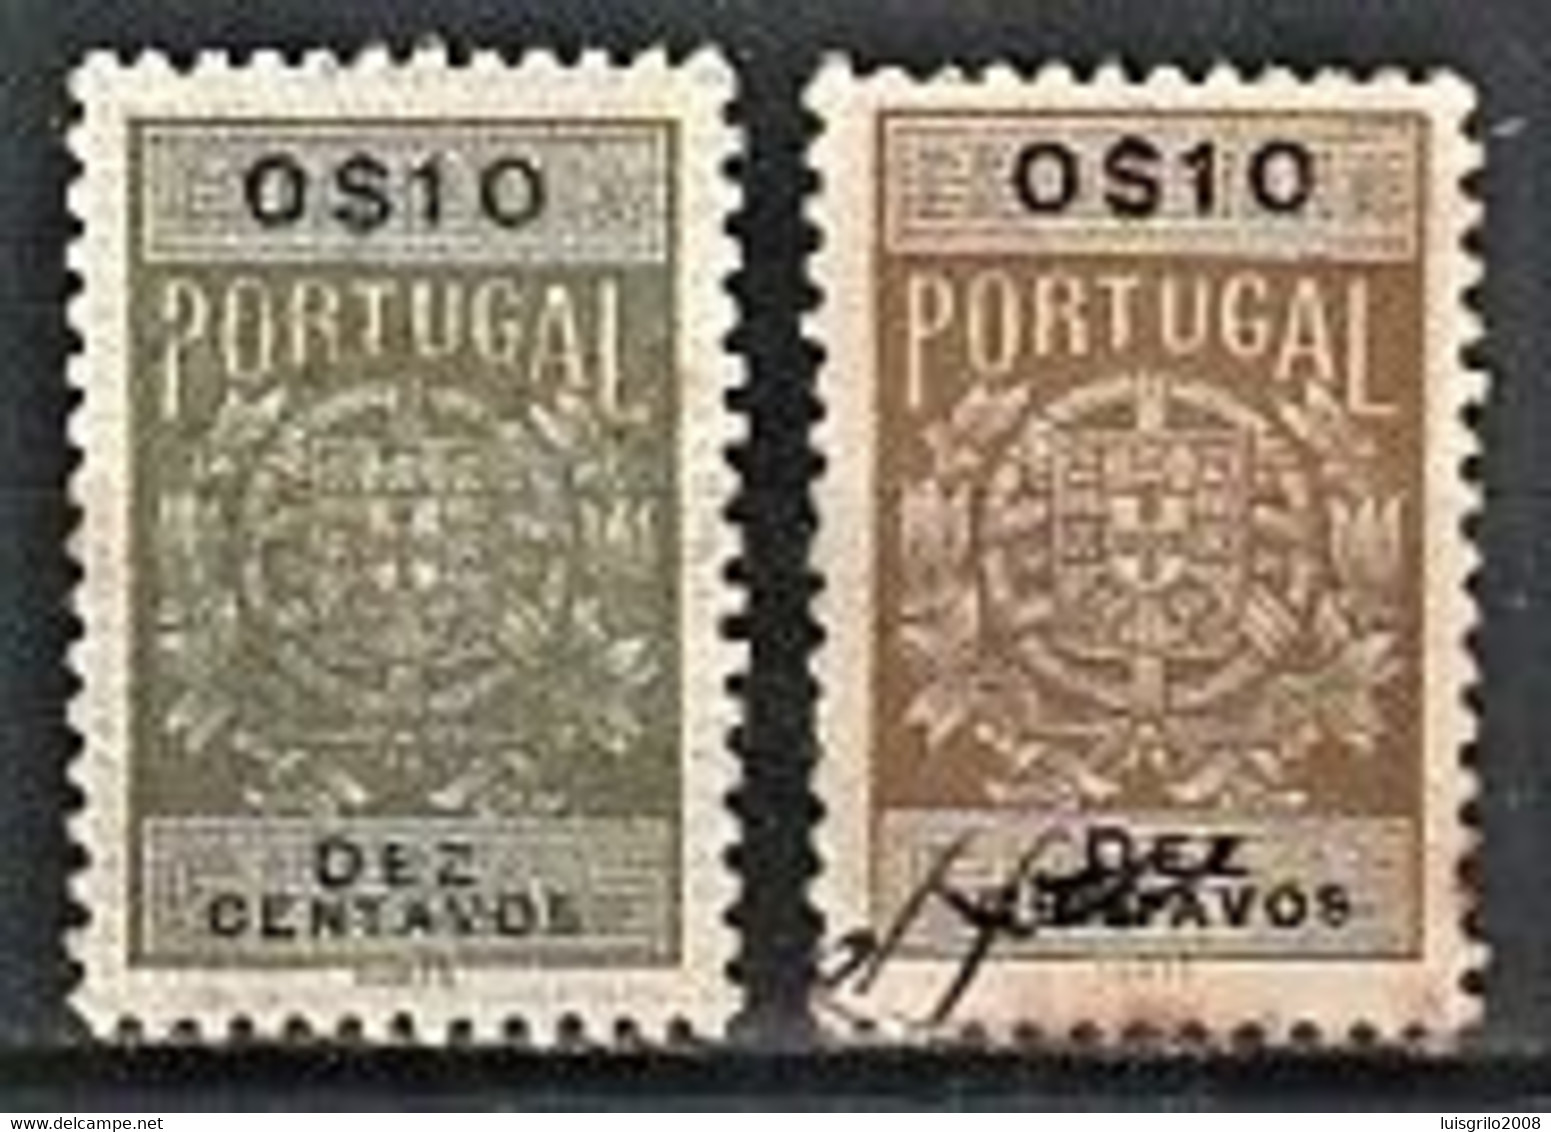 Fiscal/ Revenue, Portugal 1940 - Estampilha Fiscal -|- 0$10 - COLOR VARIANT - Is The Stamp Of The Right - Usado